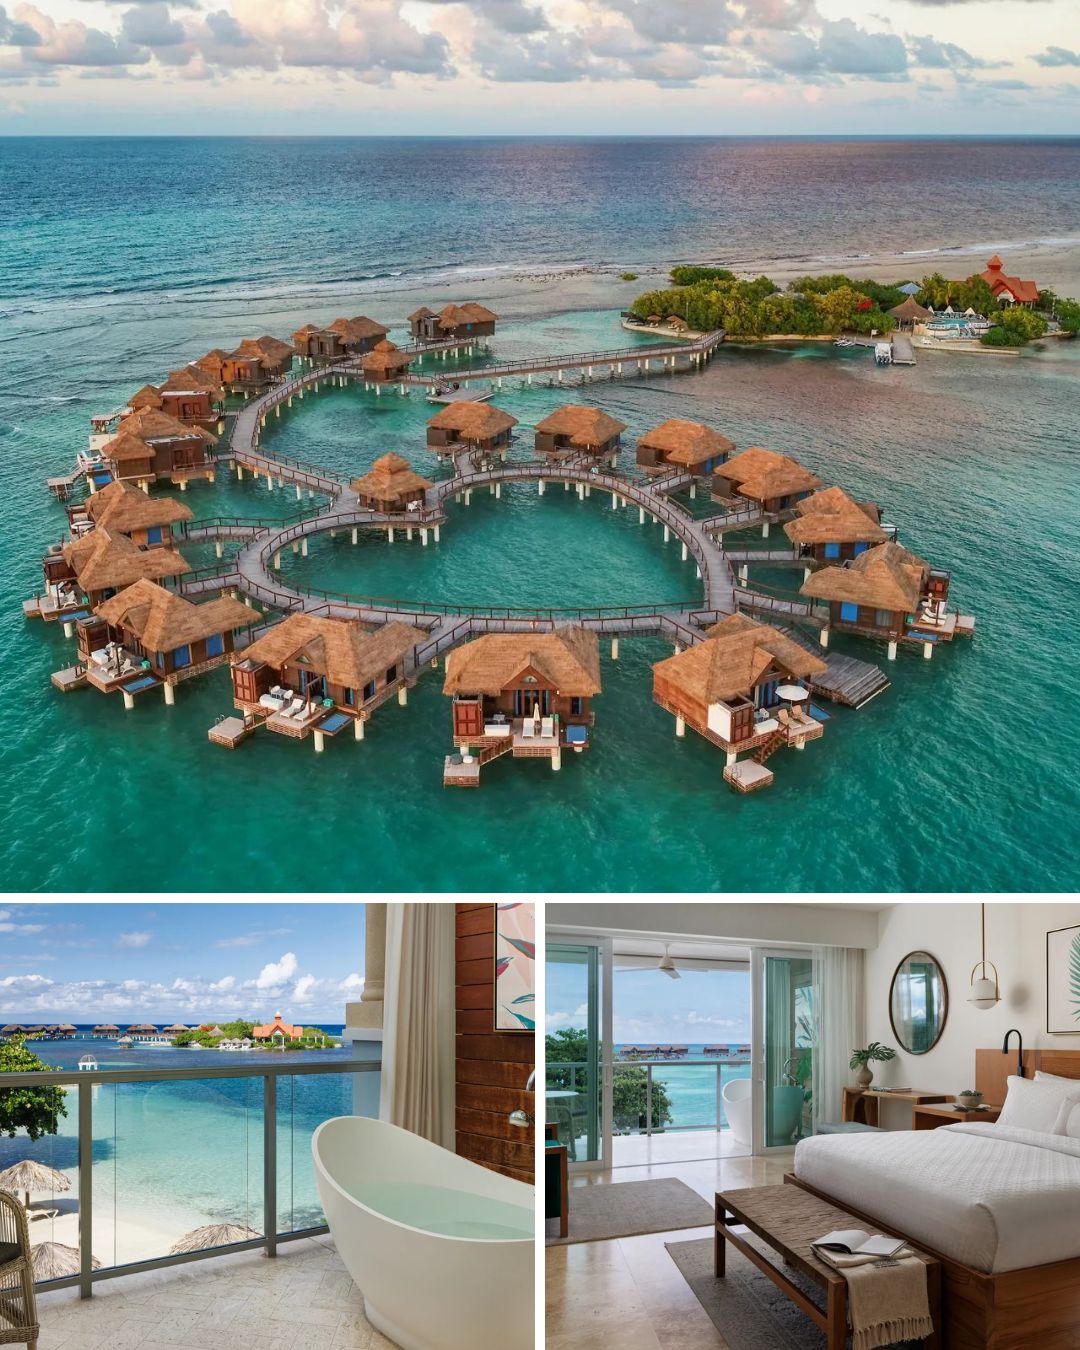 Overwater Bungalows Near The USA